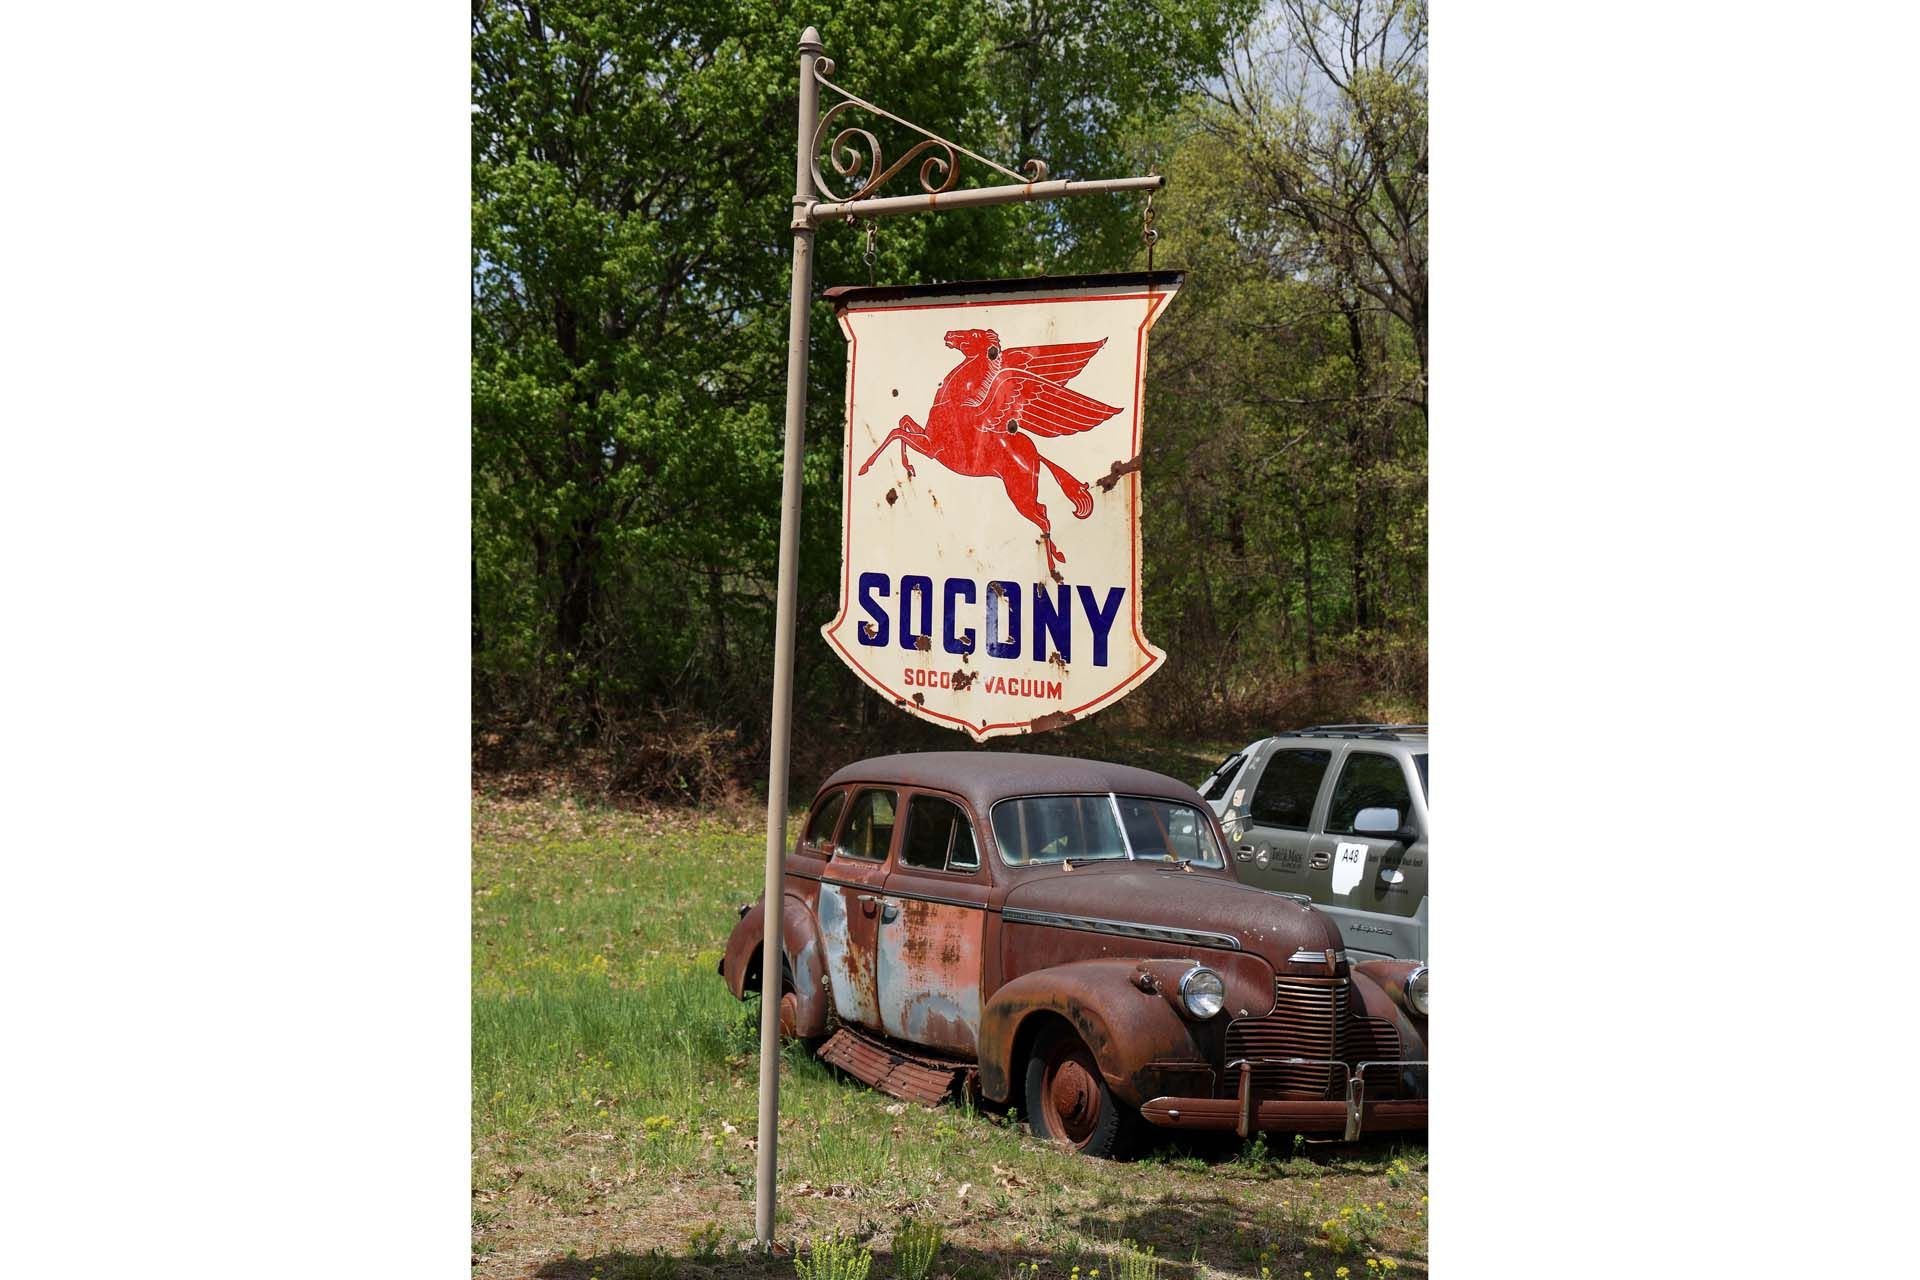 Broad Arrow Auctions | Large Socony Double-Sided Porcelain Hanging Sign with Pole